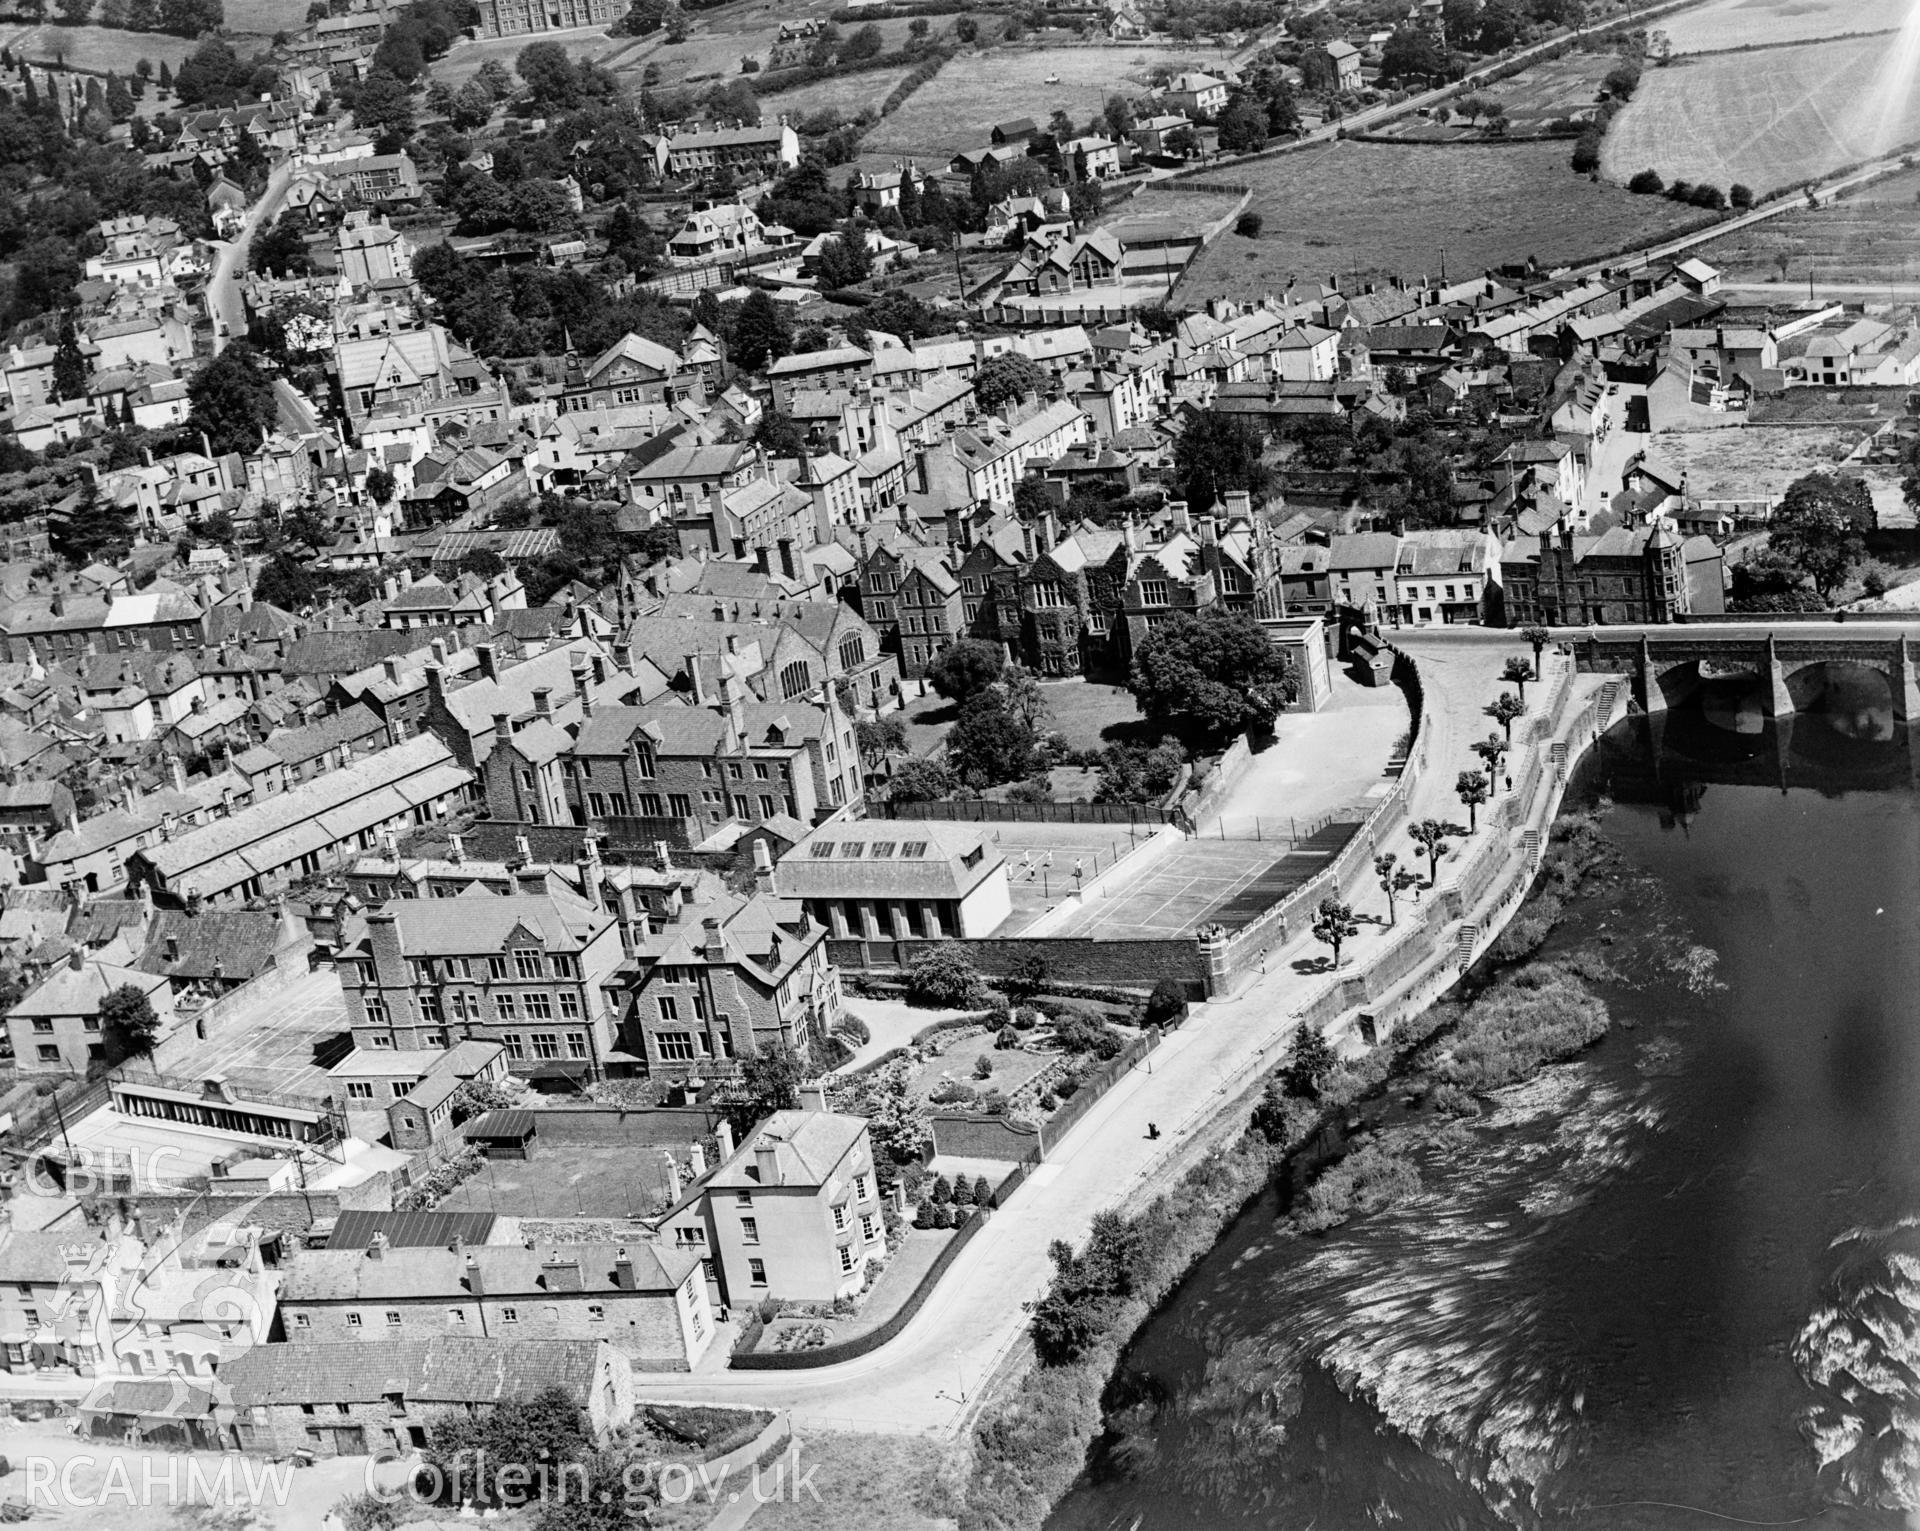 View of Monmouth showing school, oblique aerial view. 5?x4? black and white glass plate negative.